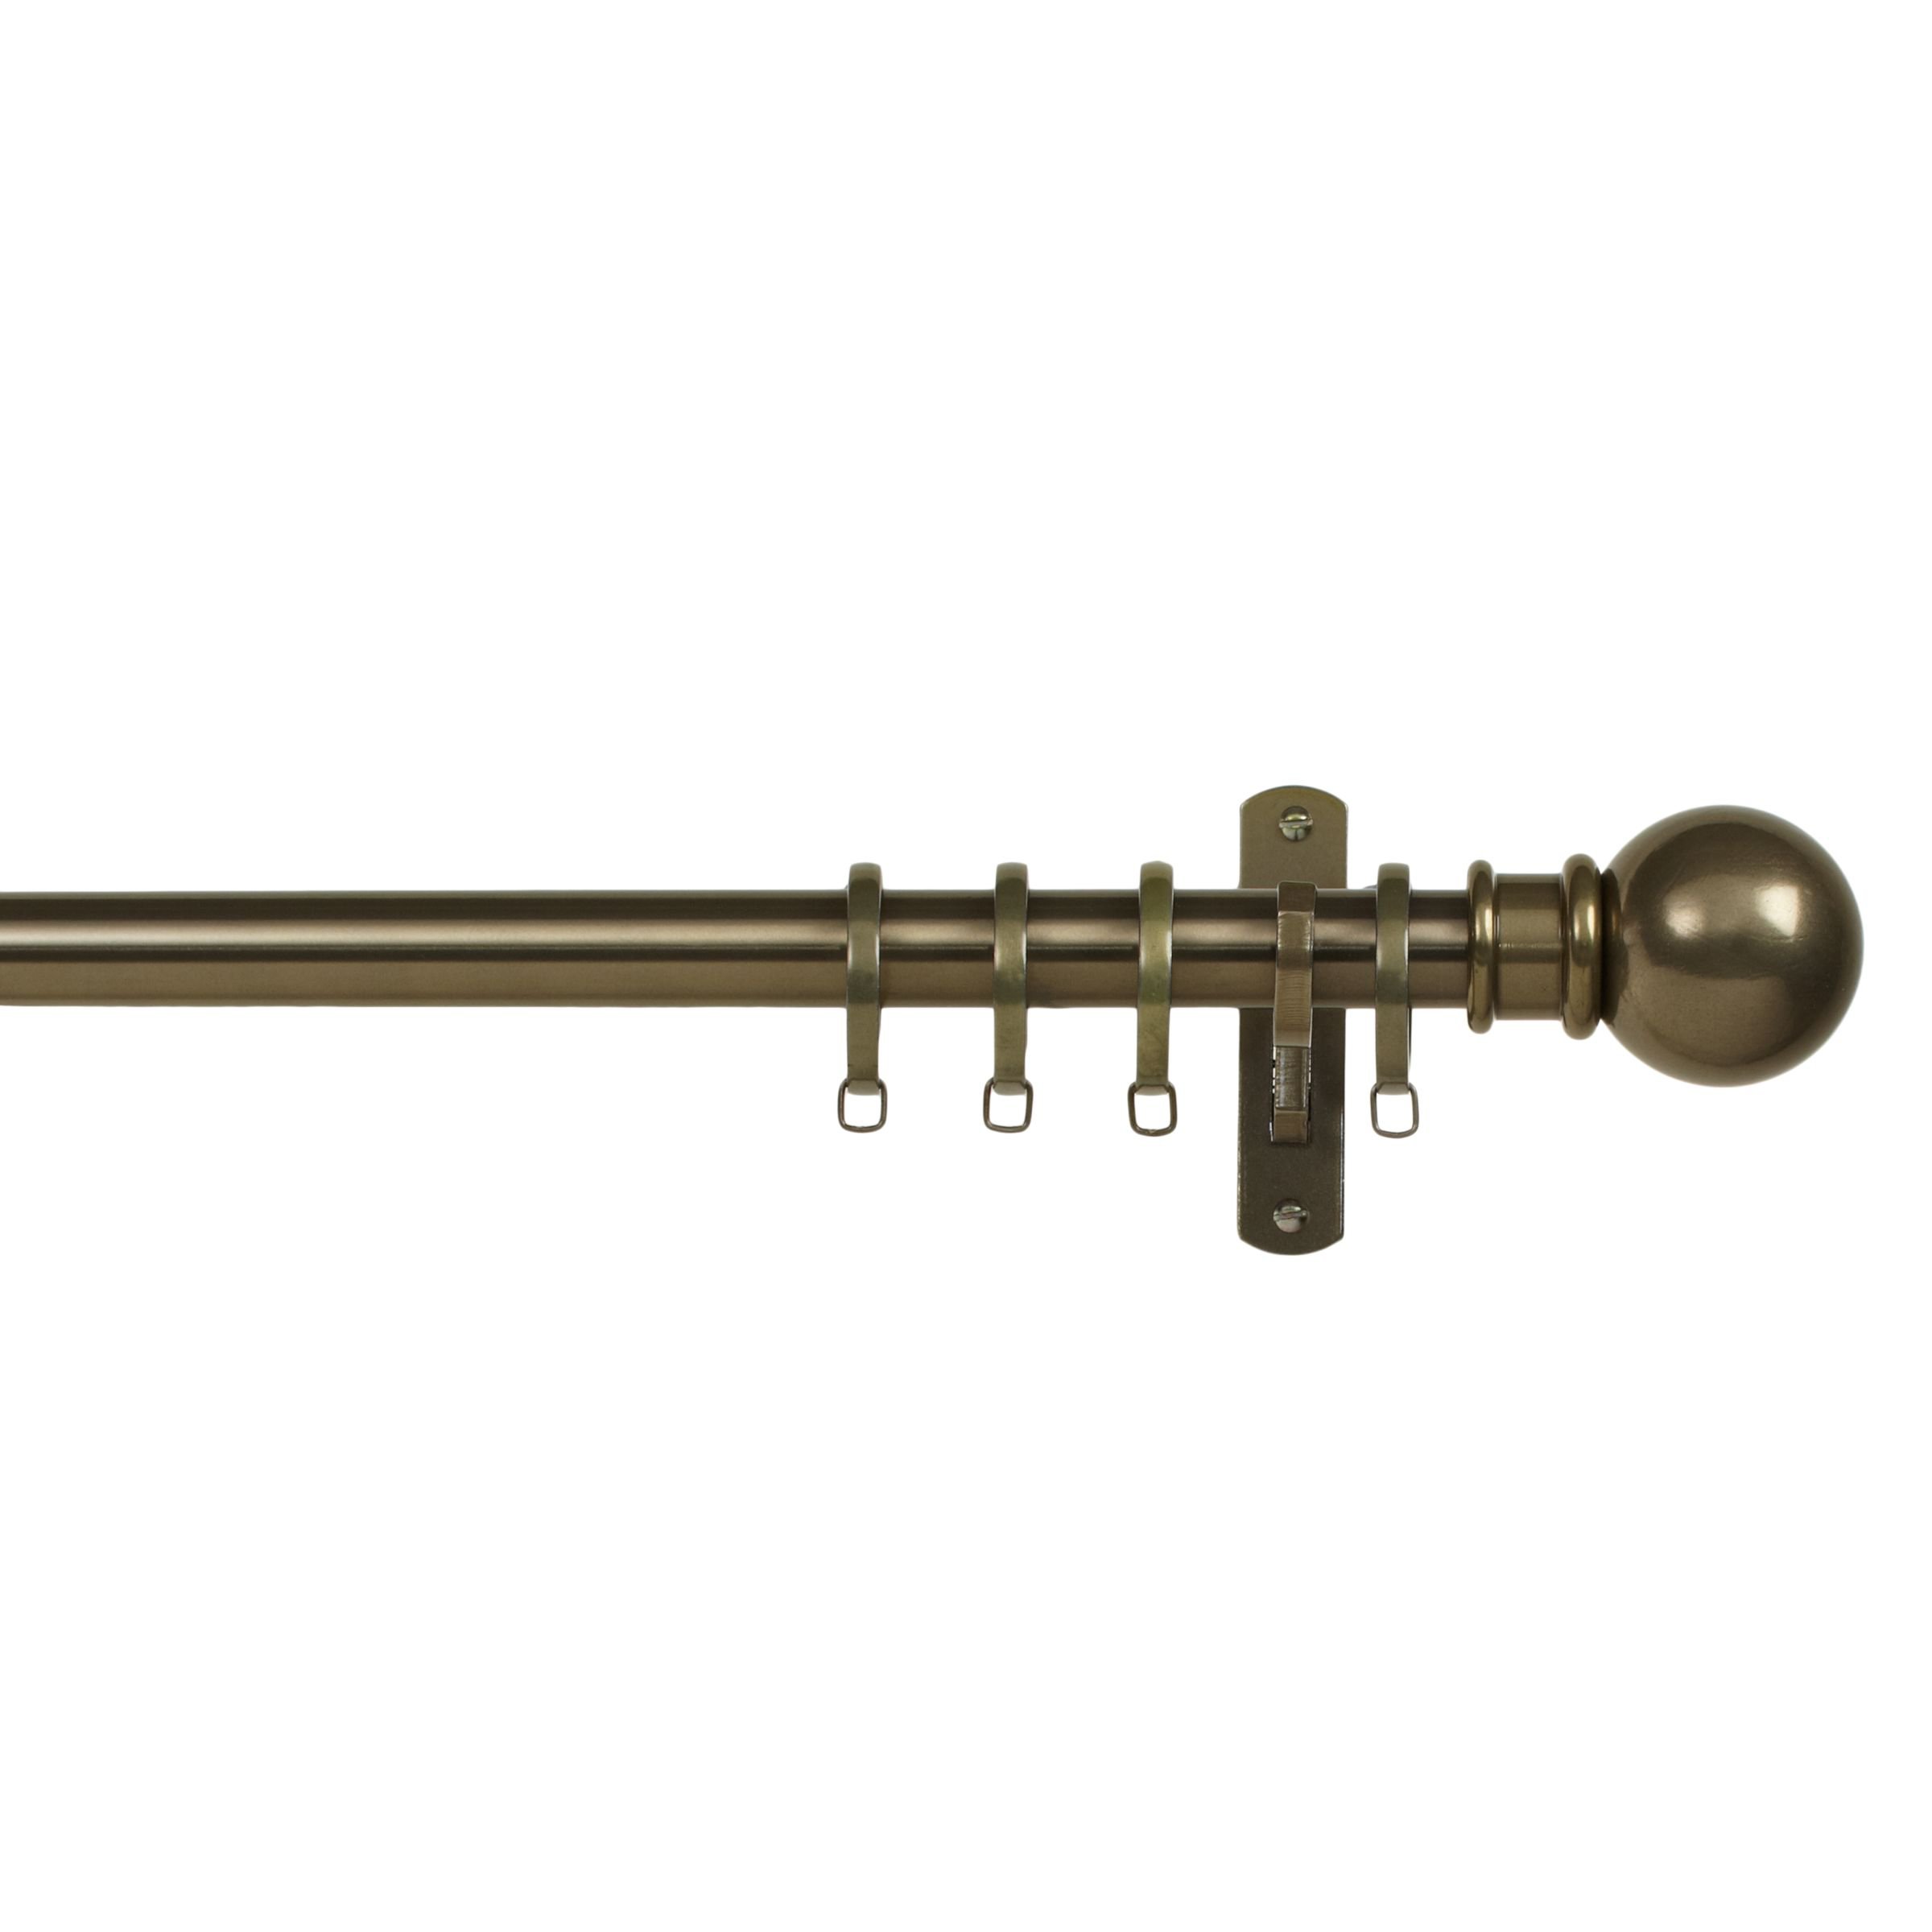 John Lewis Made to Measure Classic Straight Curtain Pole, Ball Finial